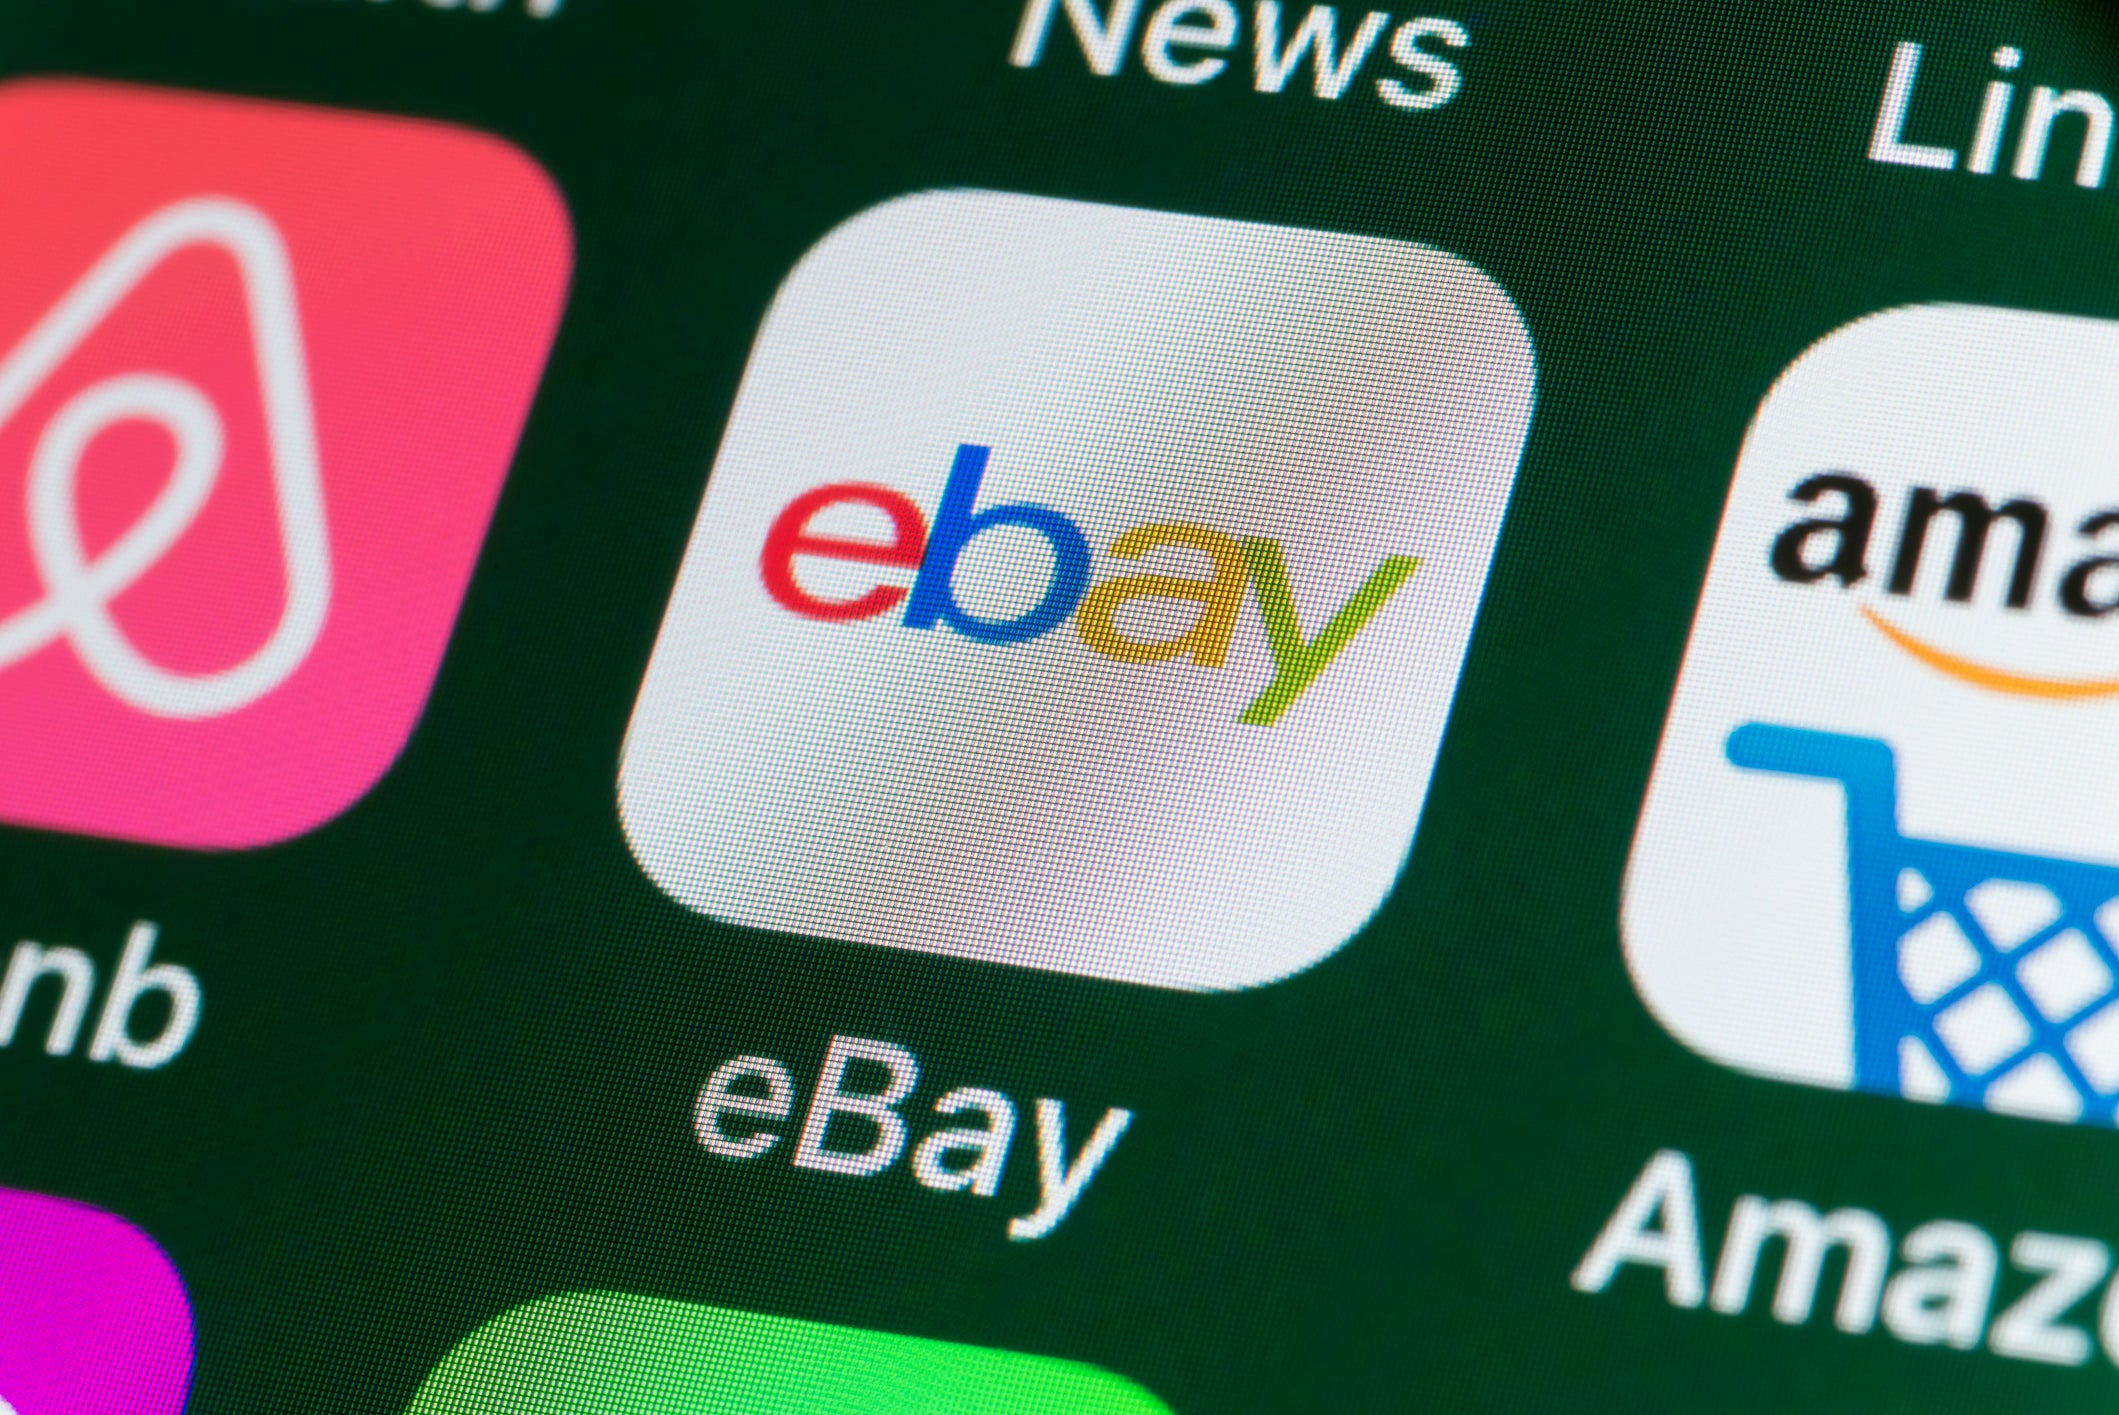 Natick resident David Steiner and his wife, Ina, were harassed and stalked for months by eBay employees